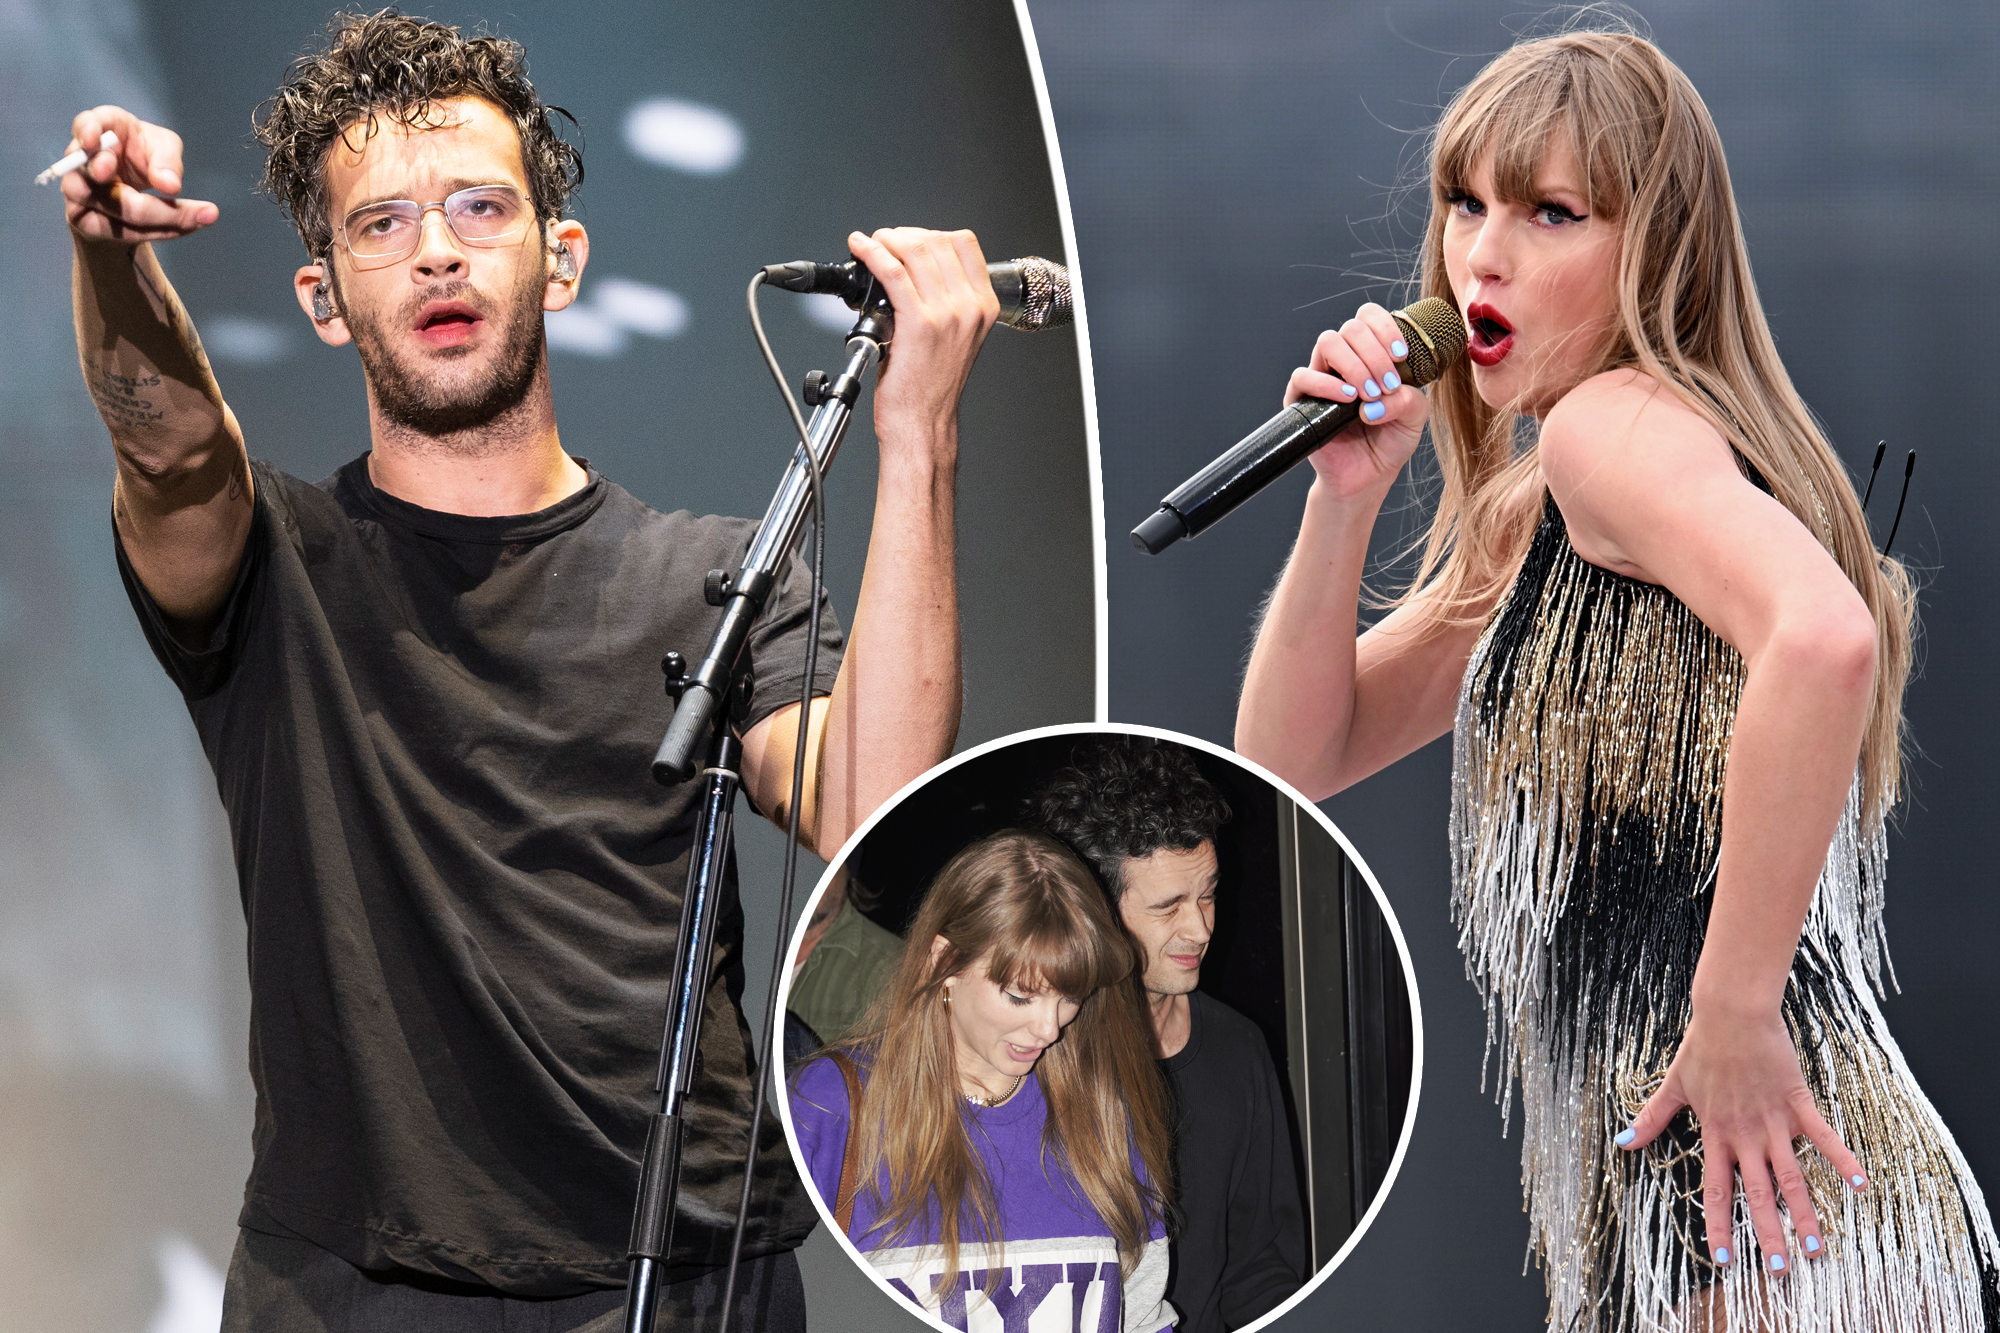 Matty Healy's Response to Fan Speculation and Taylor Swift's Influence